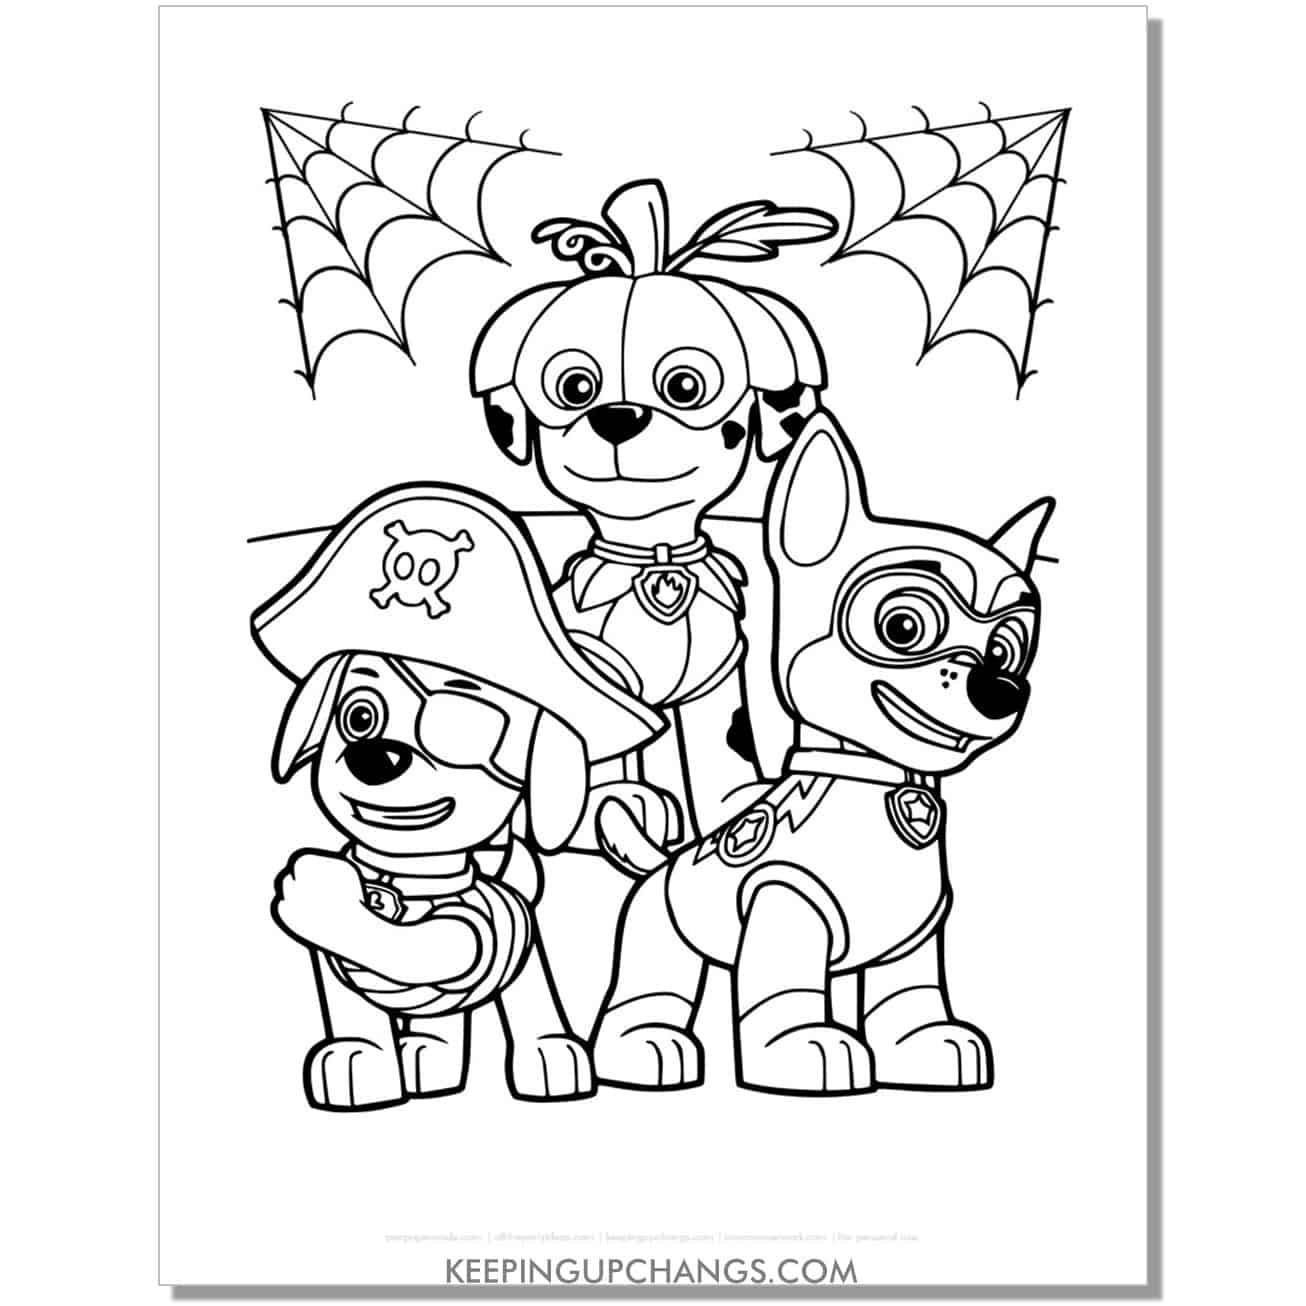 free marshall and chase halloween paw patrol coloring page, sheet.